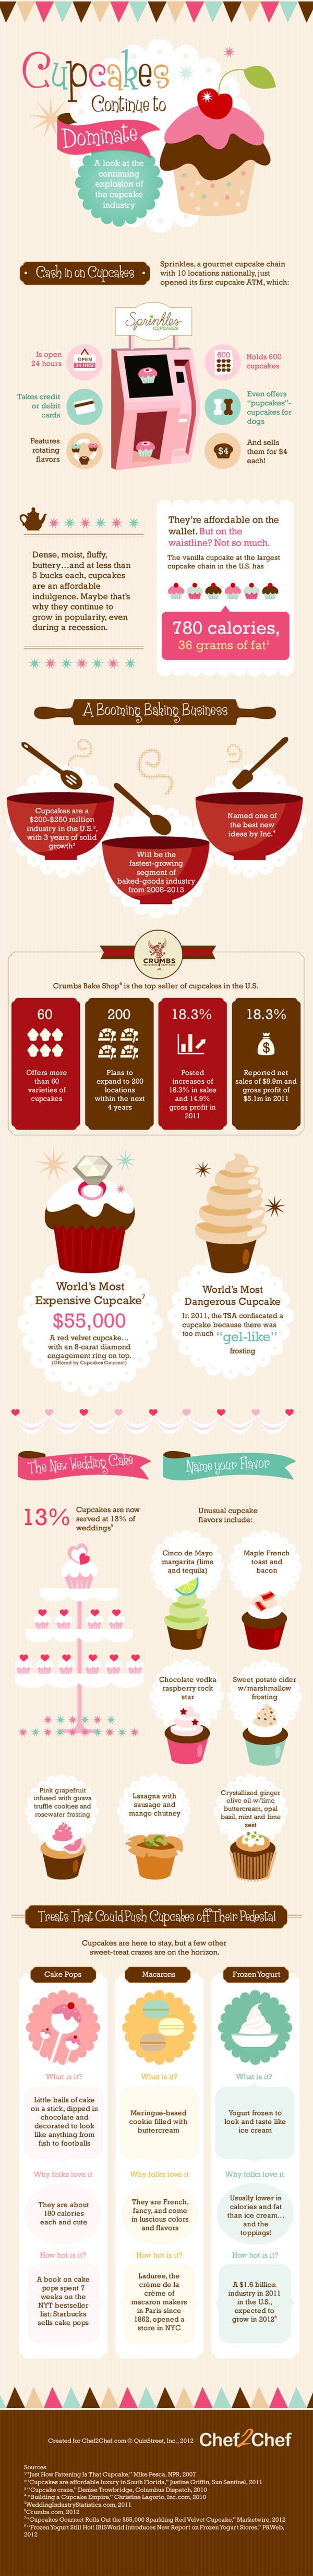 Compete details of cupcake business plan is here